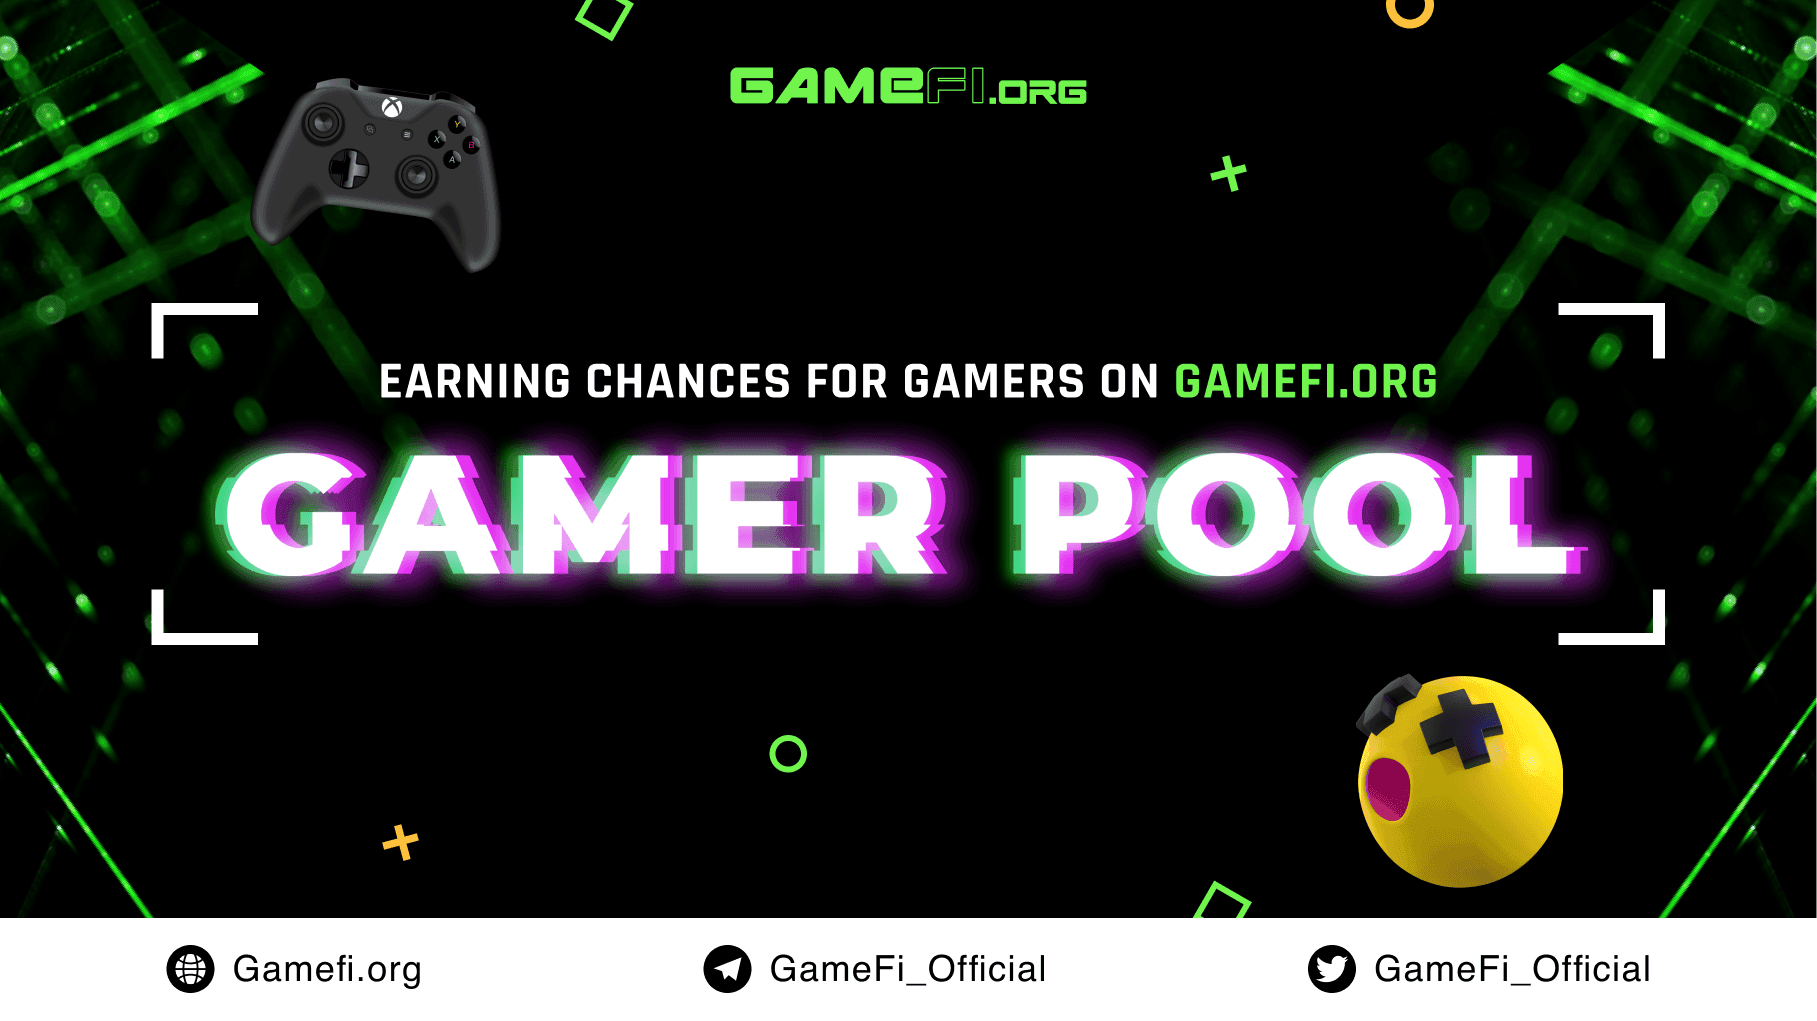 GAMER POOL: AN EXCLUSIVE EARNING CHANCE FOR GAMERS ON GAMEFI.ORG